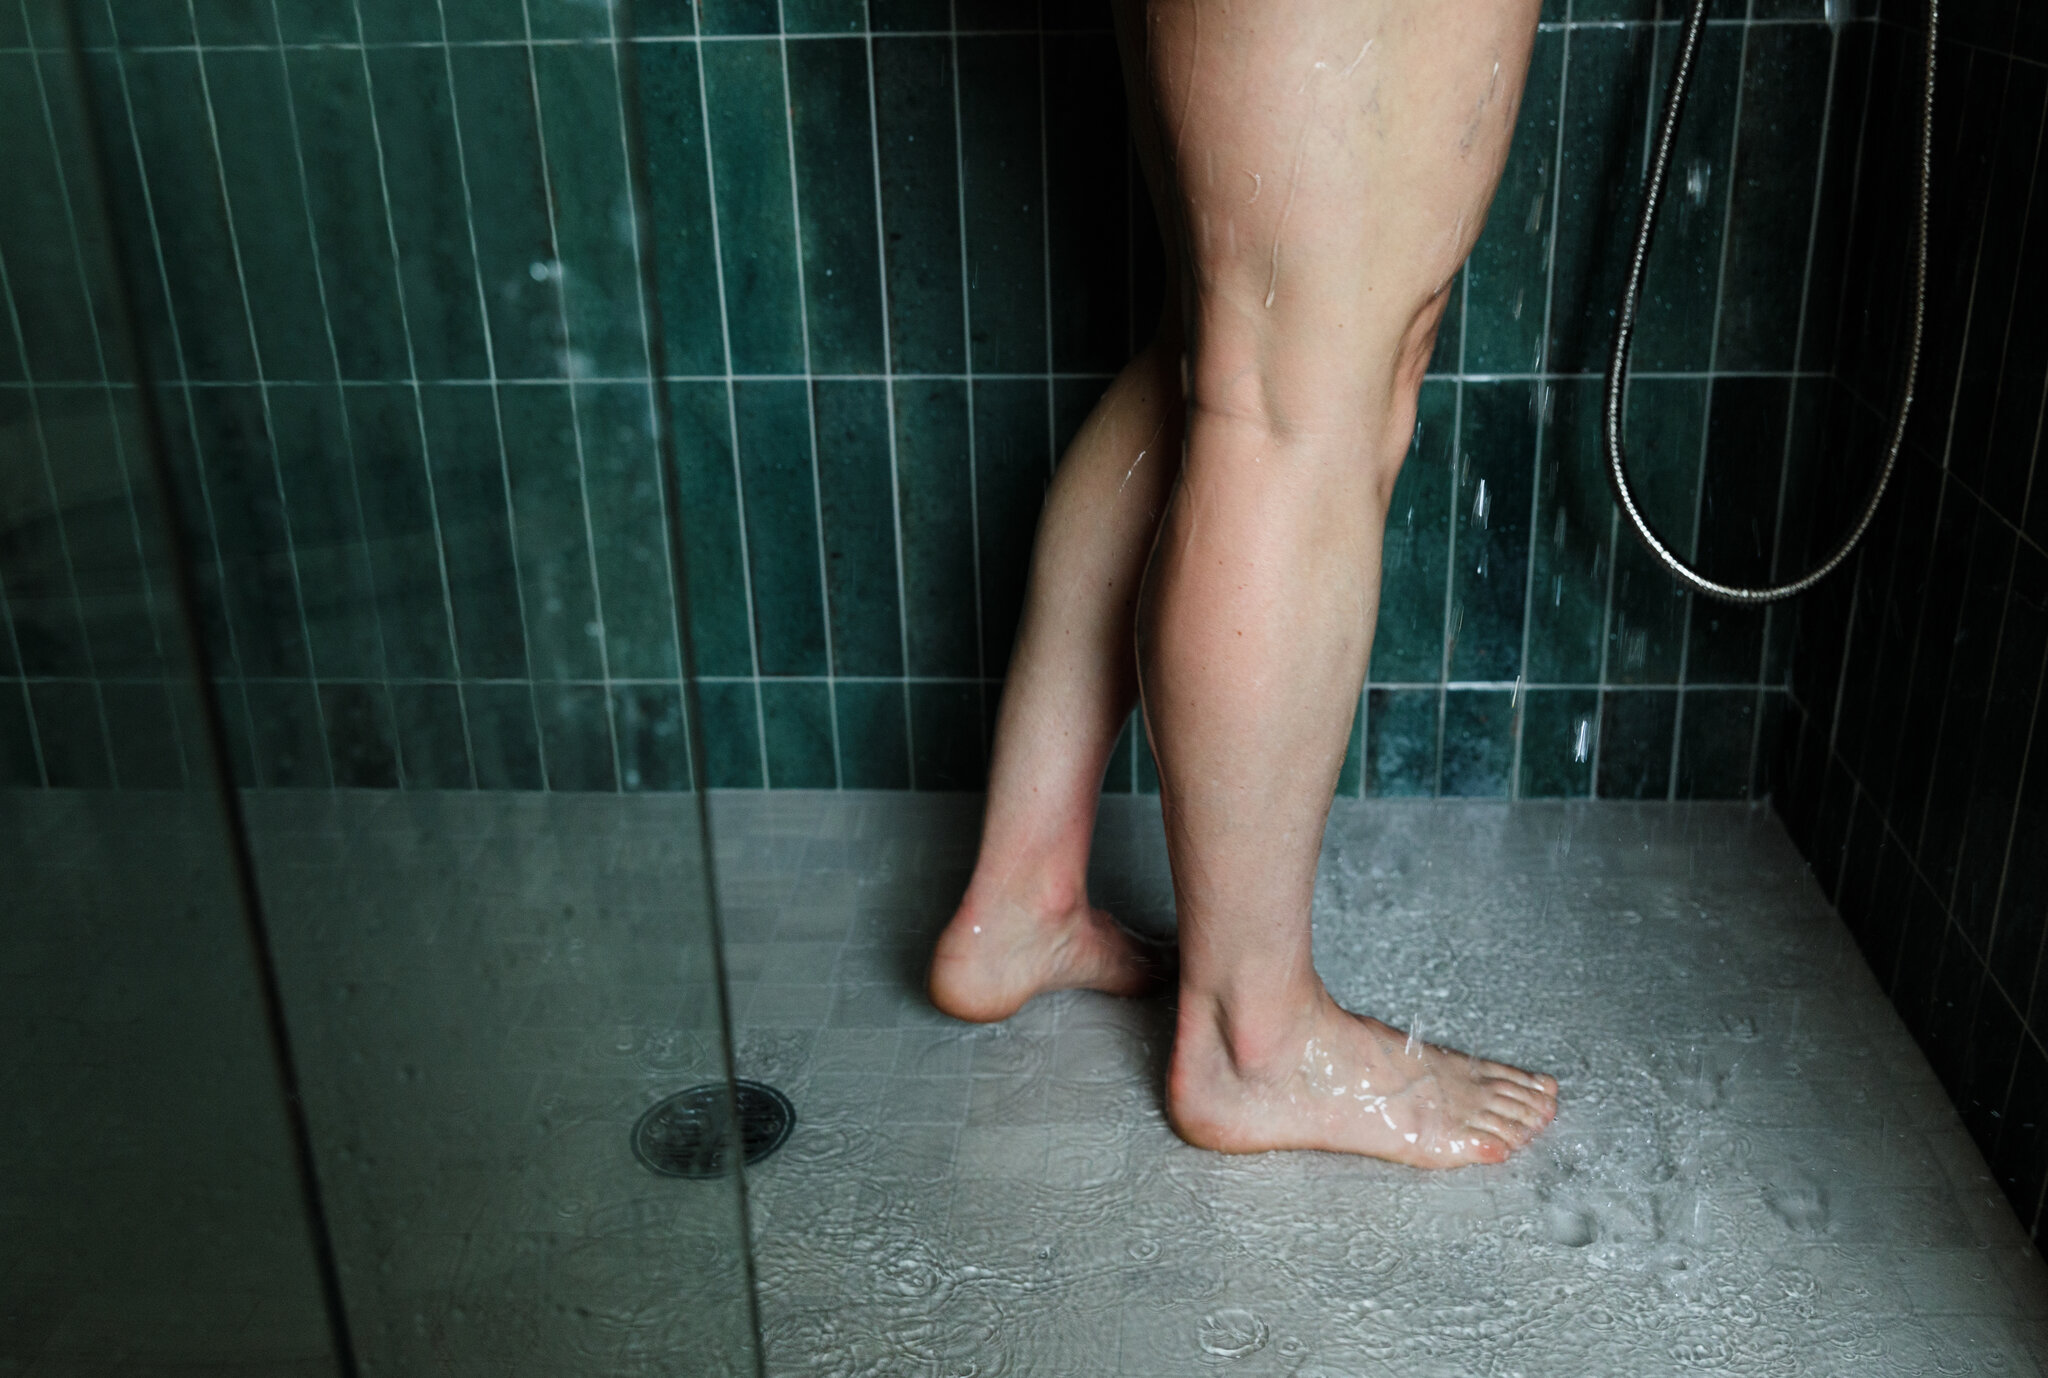 how does bathing and showering help prevent the spread of infectious disease